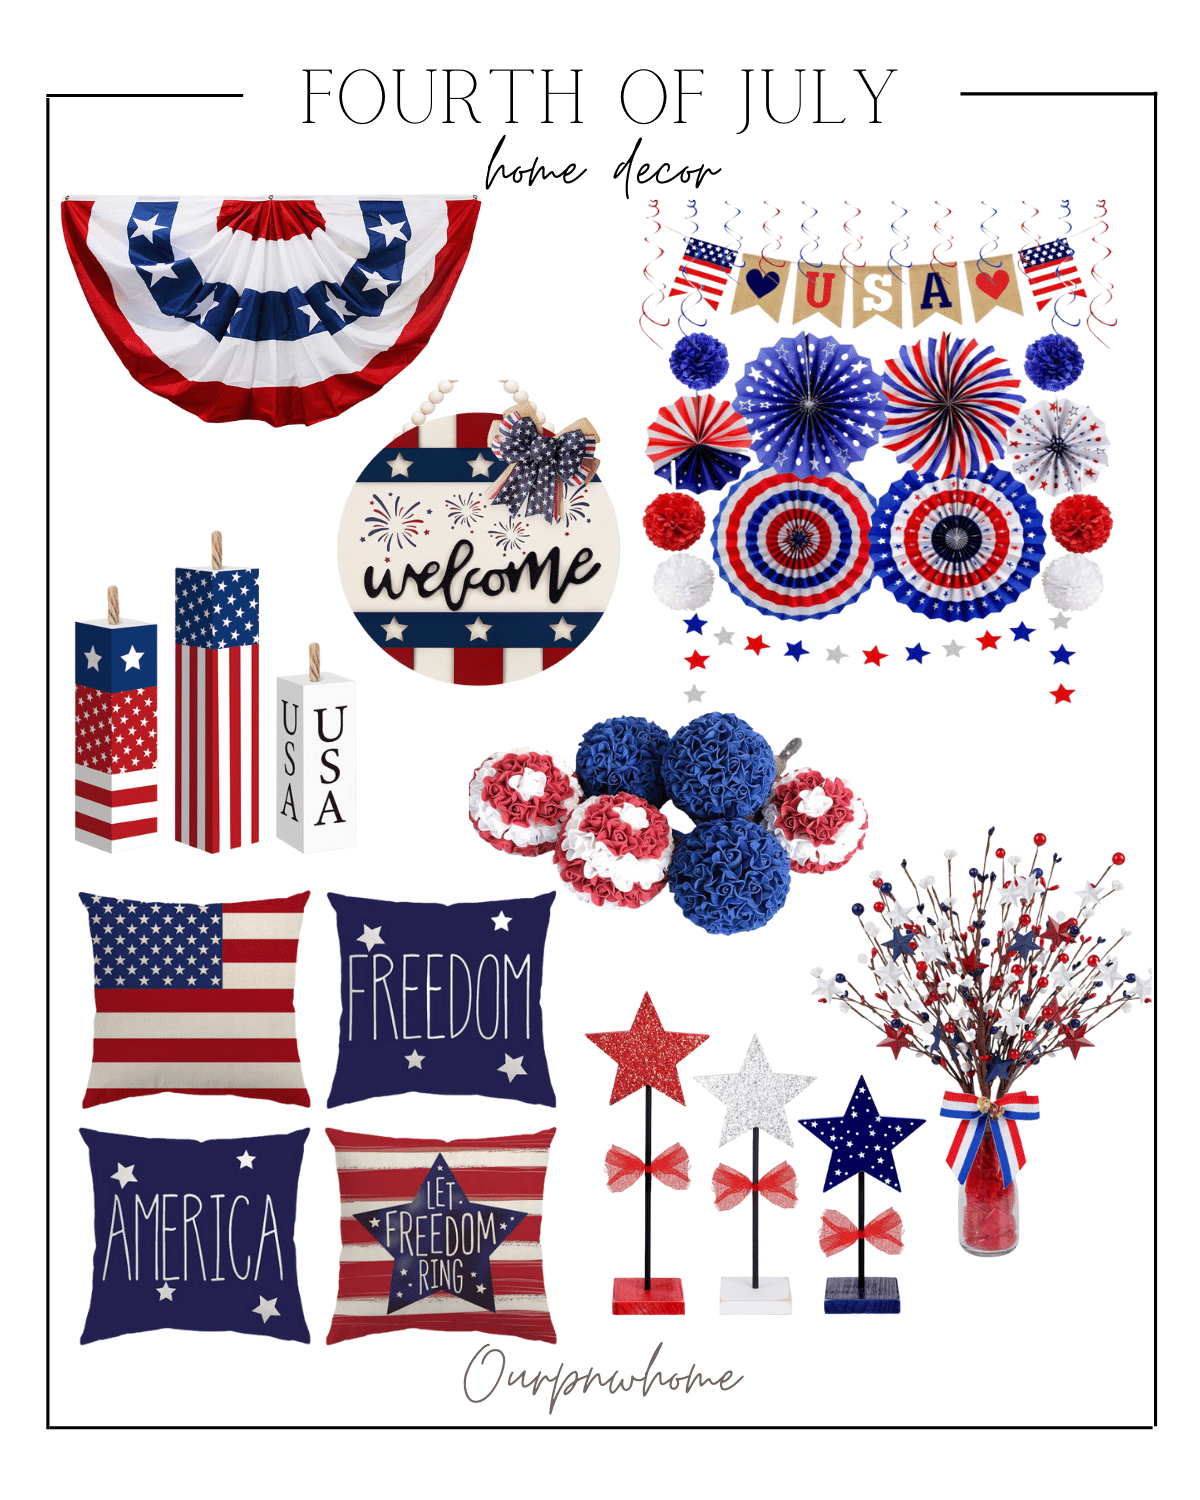 fourth of july, 4th of july, home decor, festive home decor, america, independence day, home essentials, party finds 